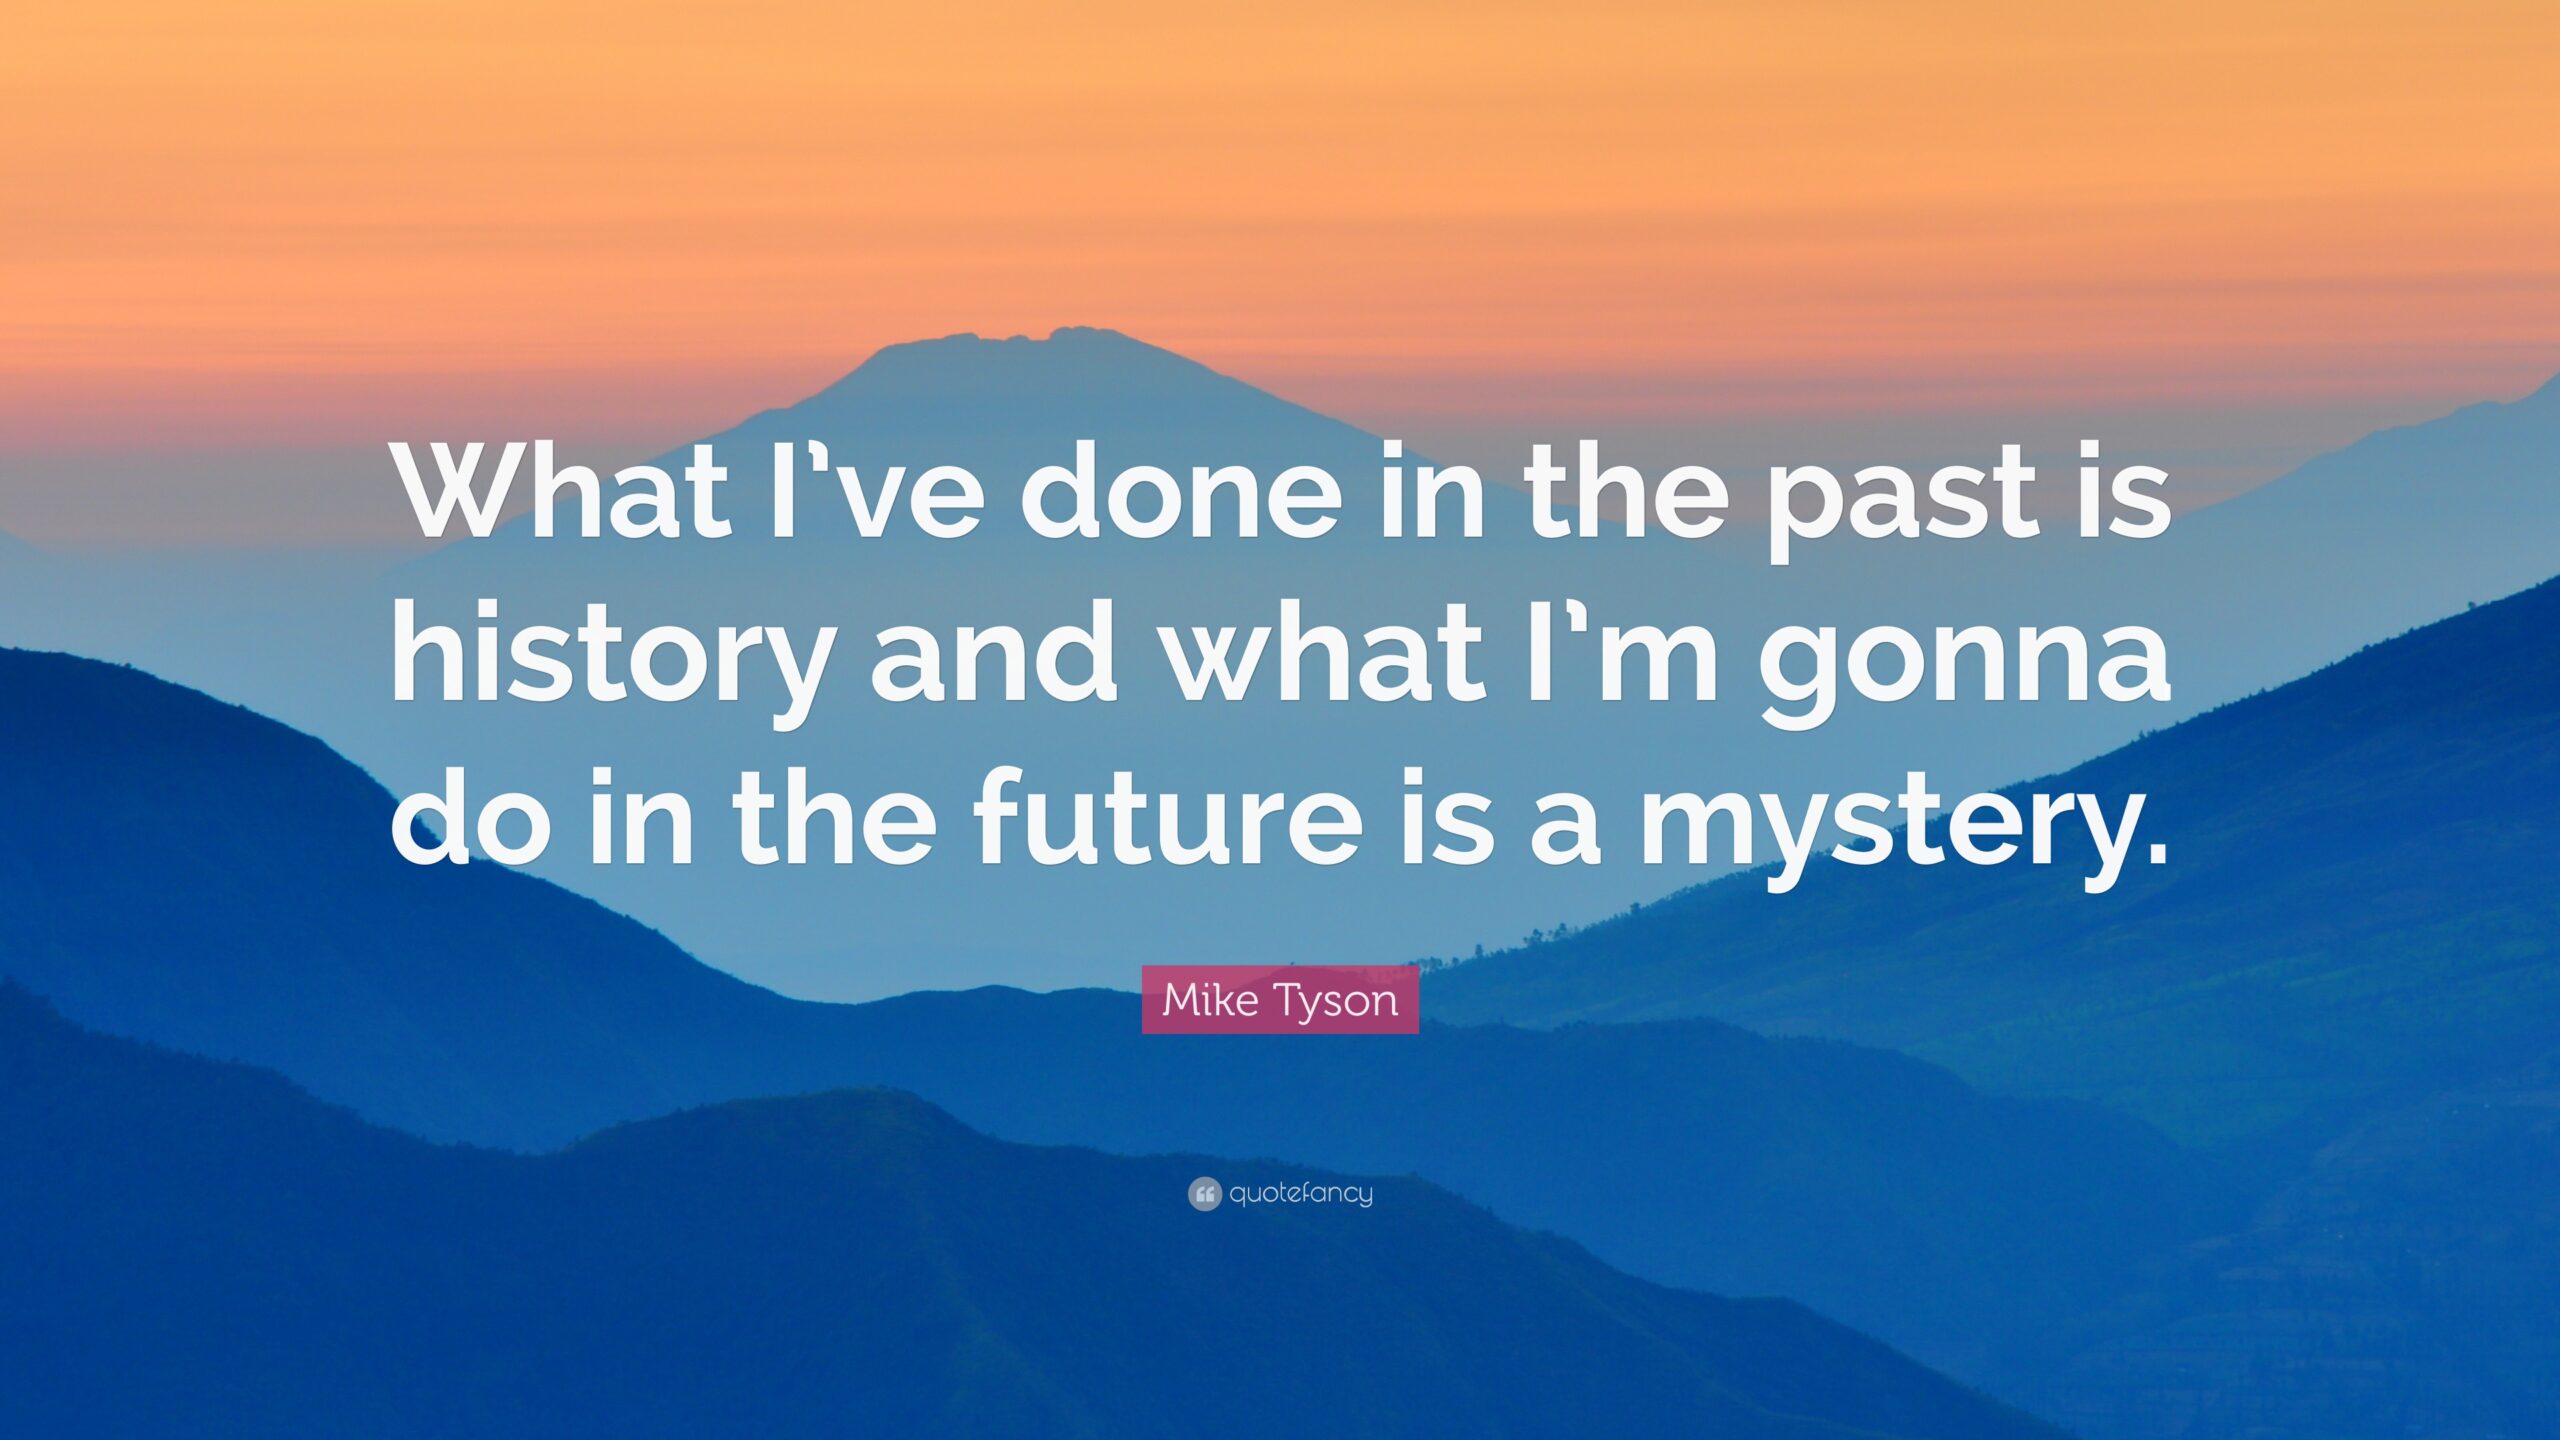 Mike Tyson Quote “What I’ve done in the past is history and what I